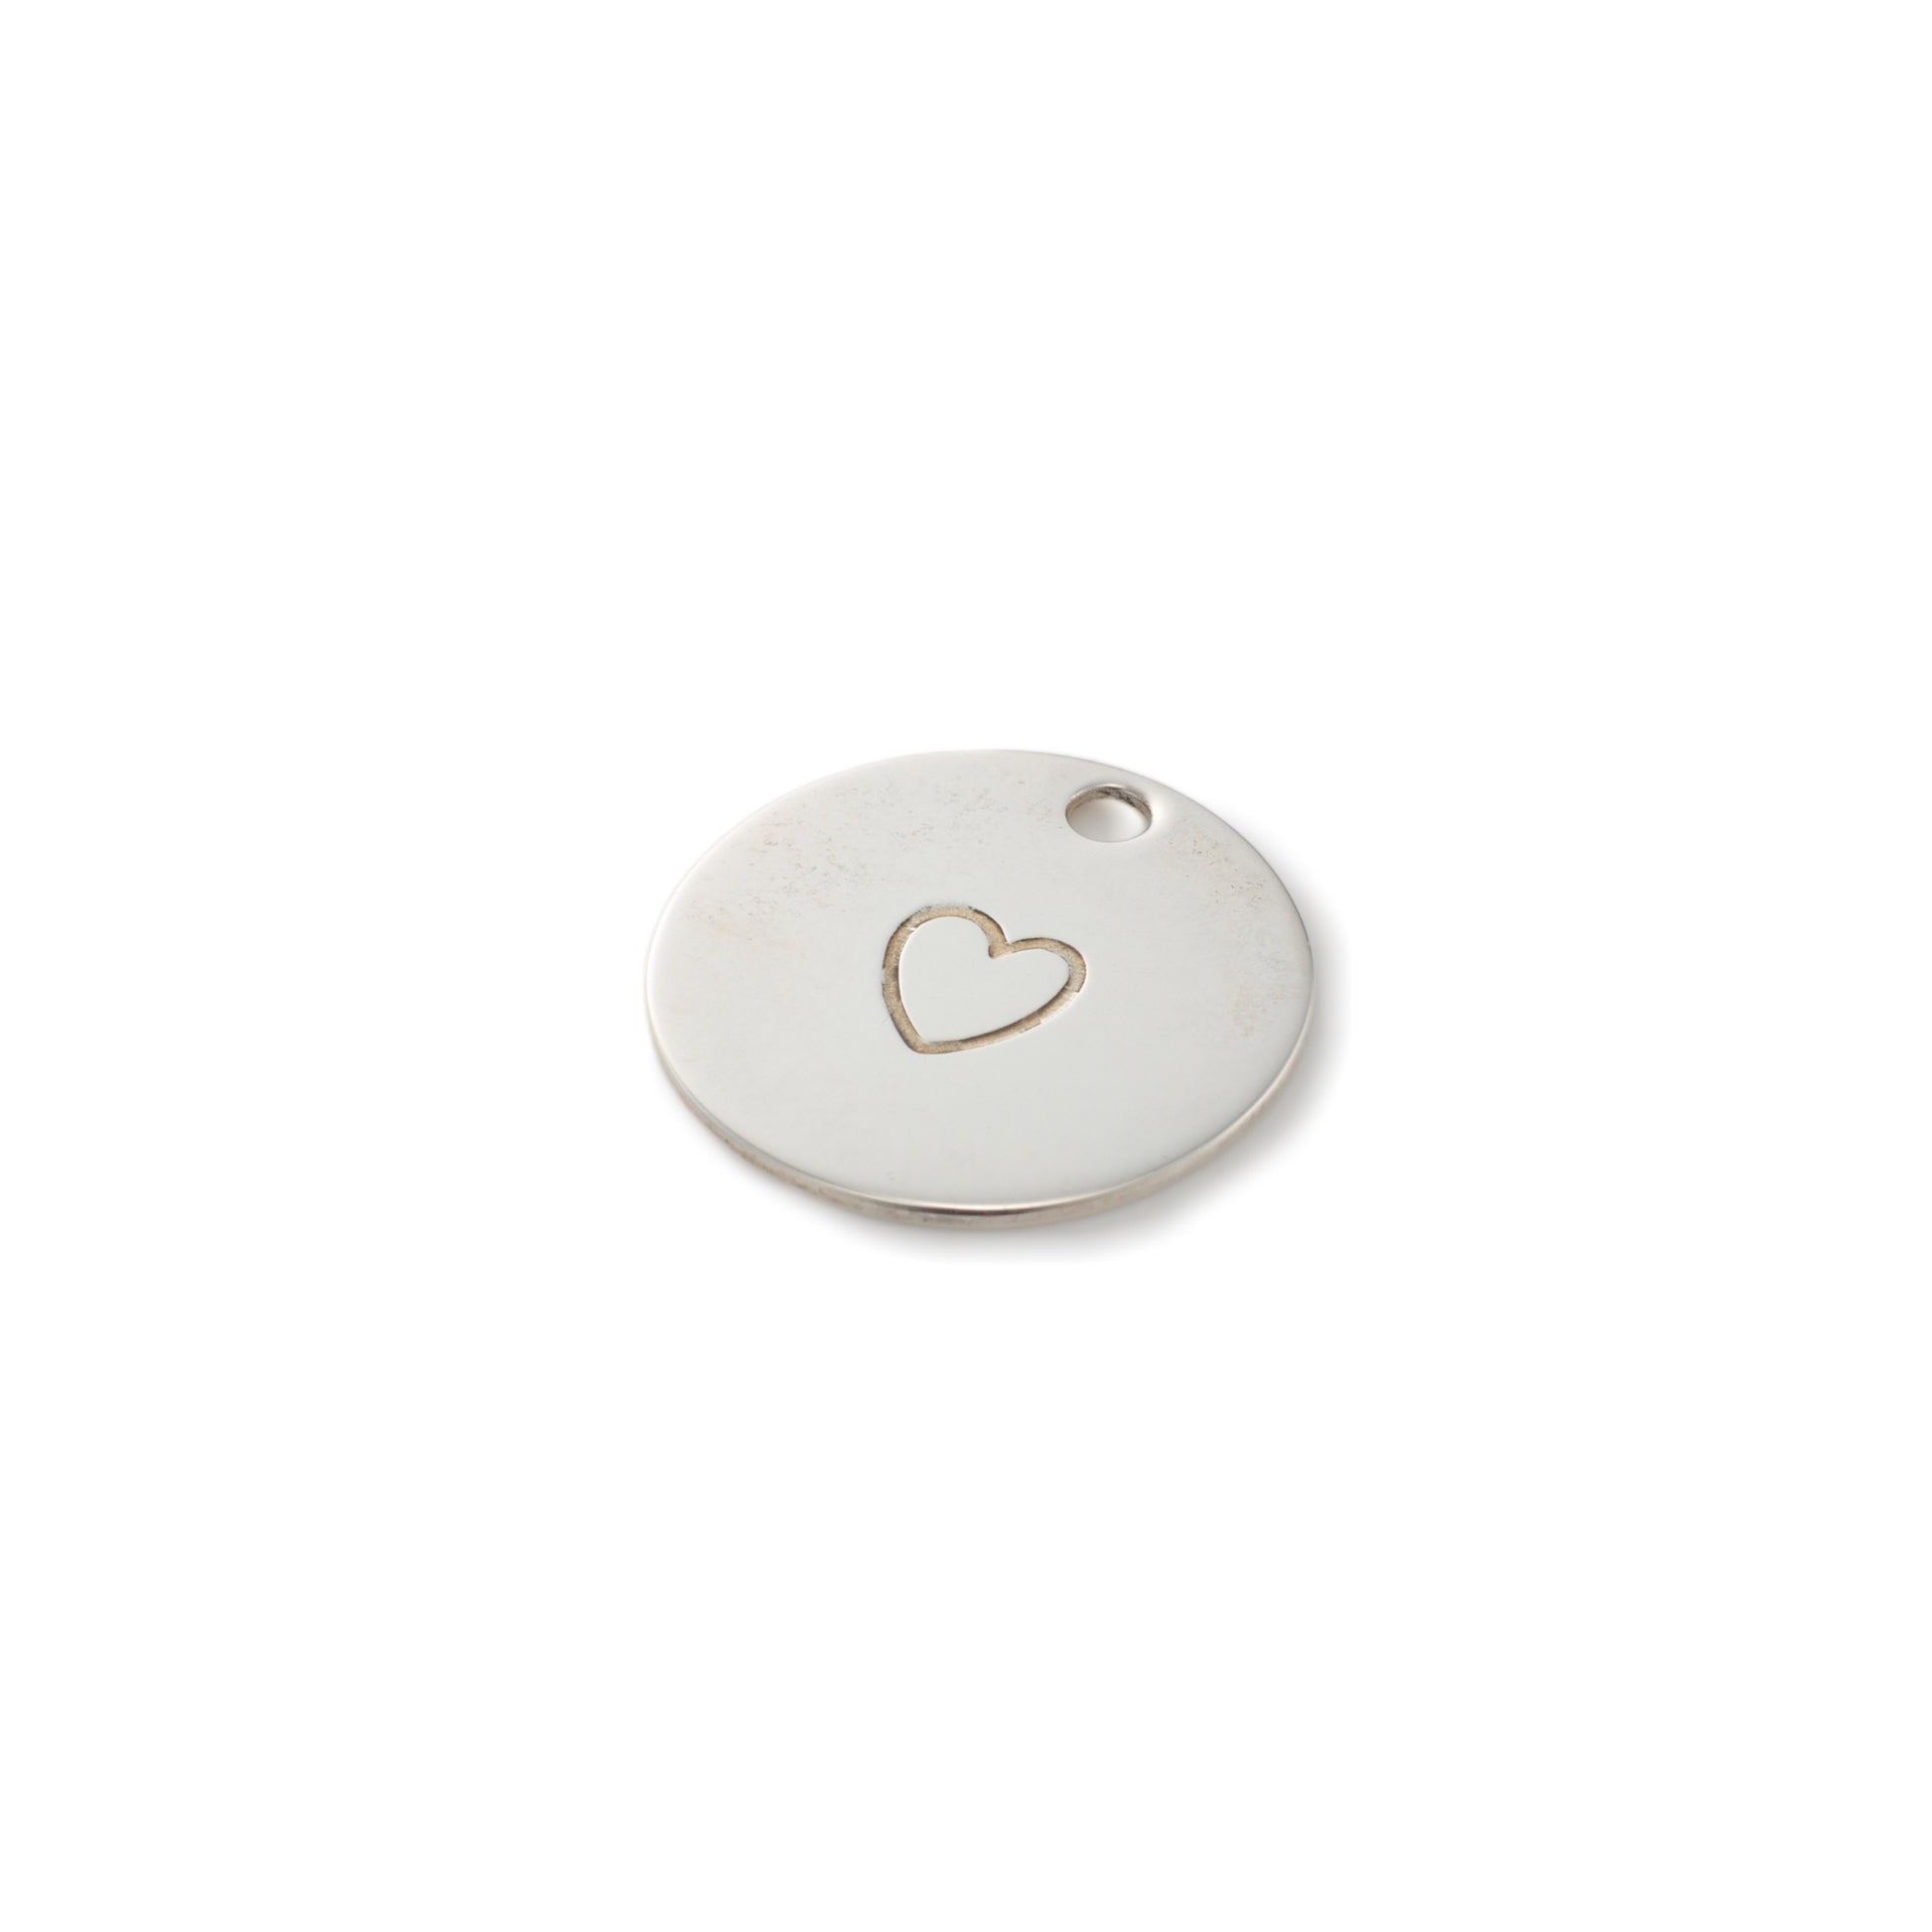 SPECIAL PRICE 【Aurore de Heusch】ネックレスチャーム Round Charm